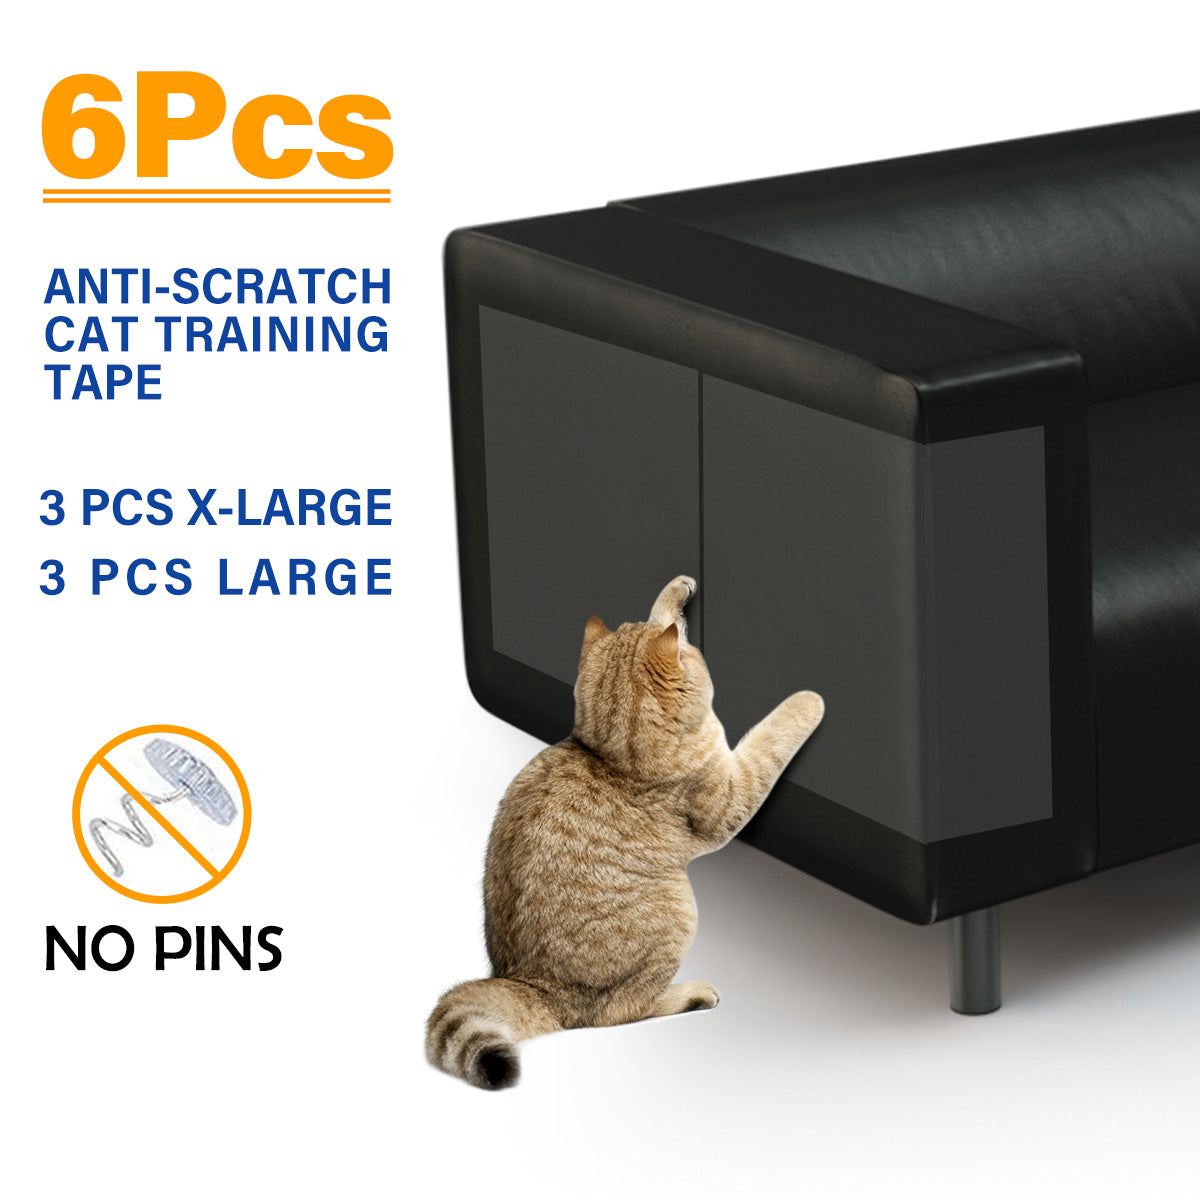 Furniture Protectors from Cats, 10/20Pcs Cat Scratch Deterrent Tape Anti-Scratch Cat Double Sided anti Scratch Tape for Cats | Furniture, Couch, Door, Table Legs Protector